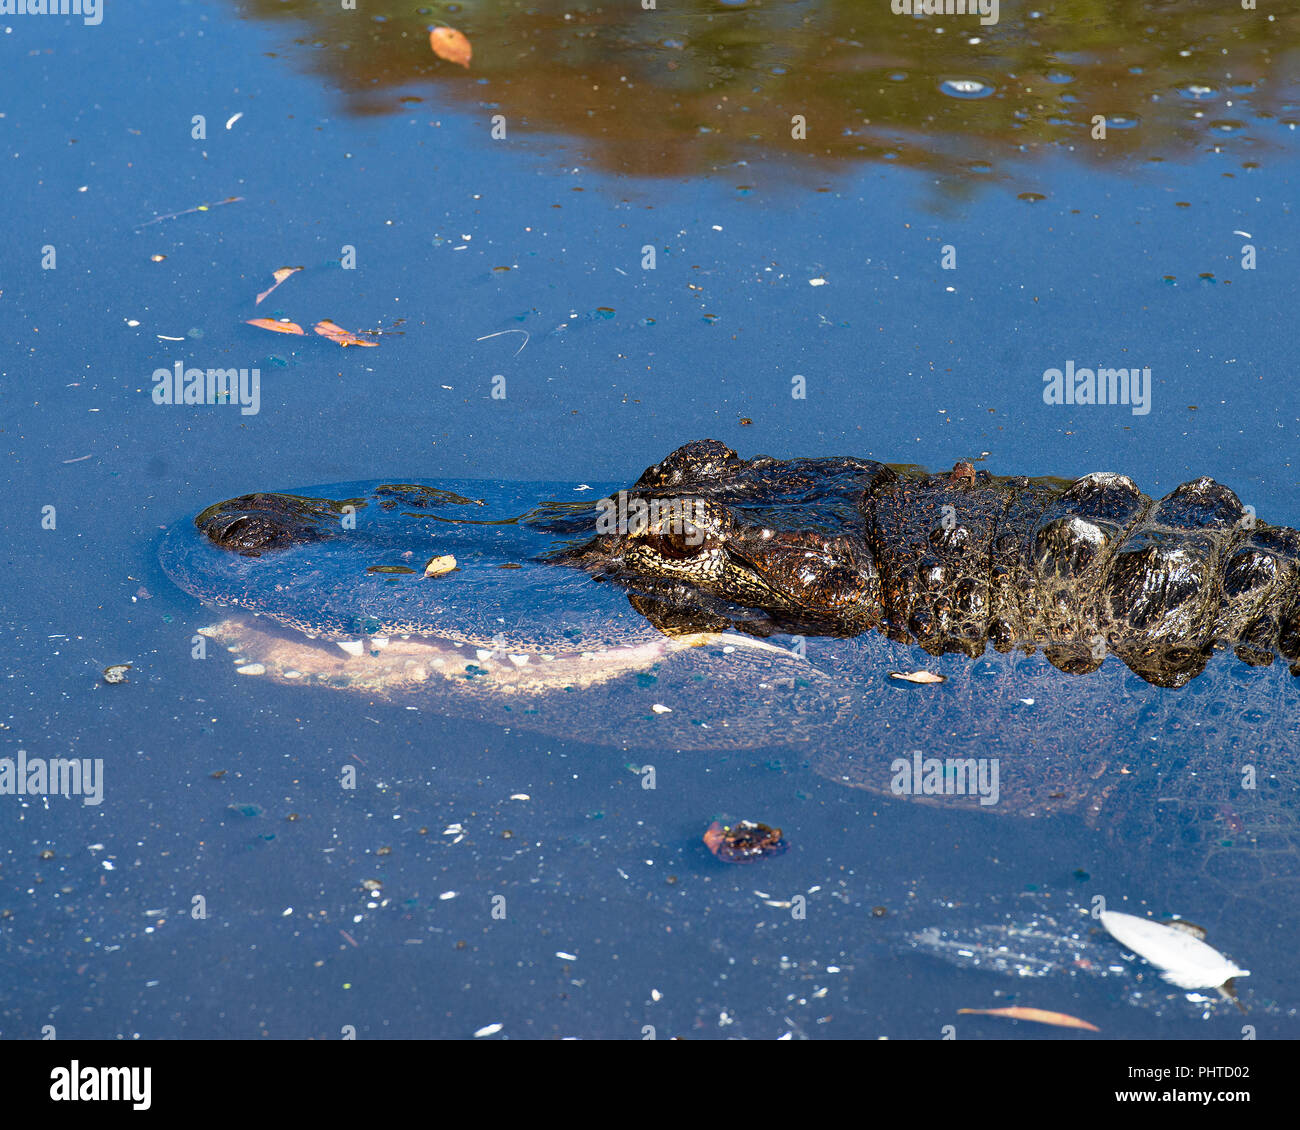 Alligator animal head close-up profile view in the water displaying eyes in its  environment and surrounding. Stock Photo